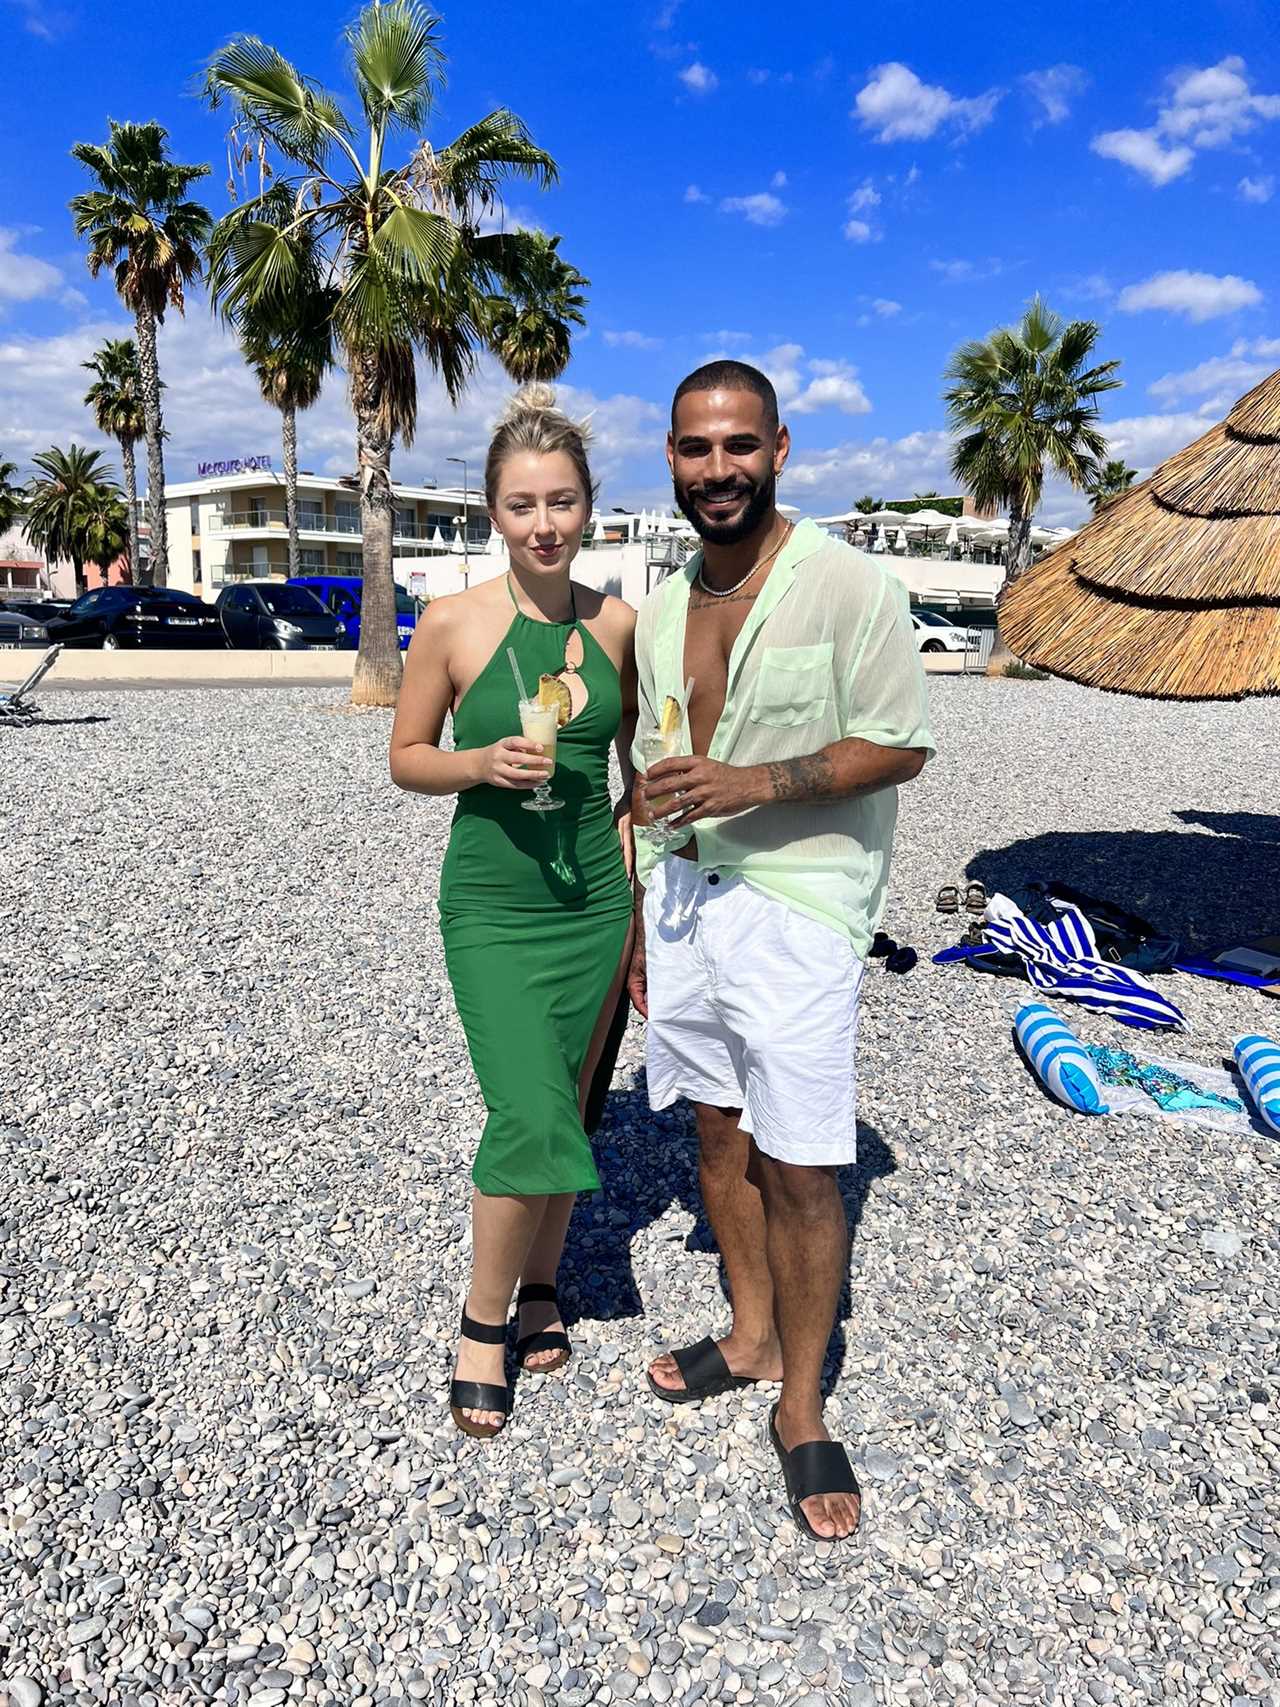 GBBO’s Sandro & Rebs spark rumours they’re dating with cosy holiday pics – despite him paying tribute to partner on show